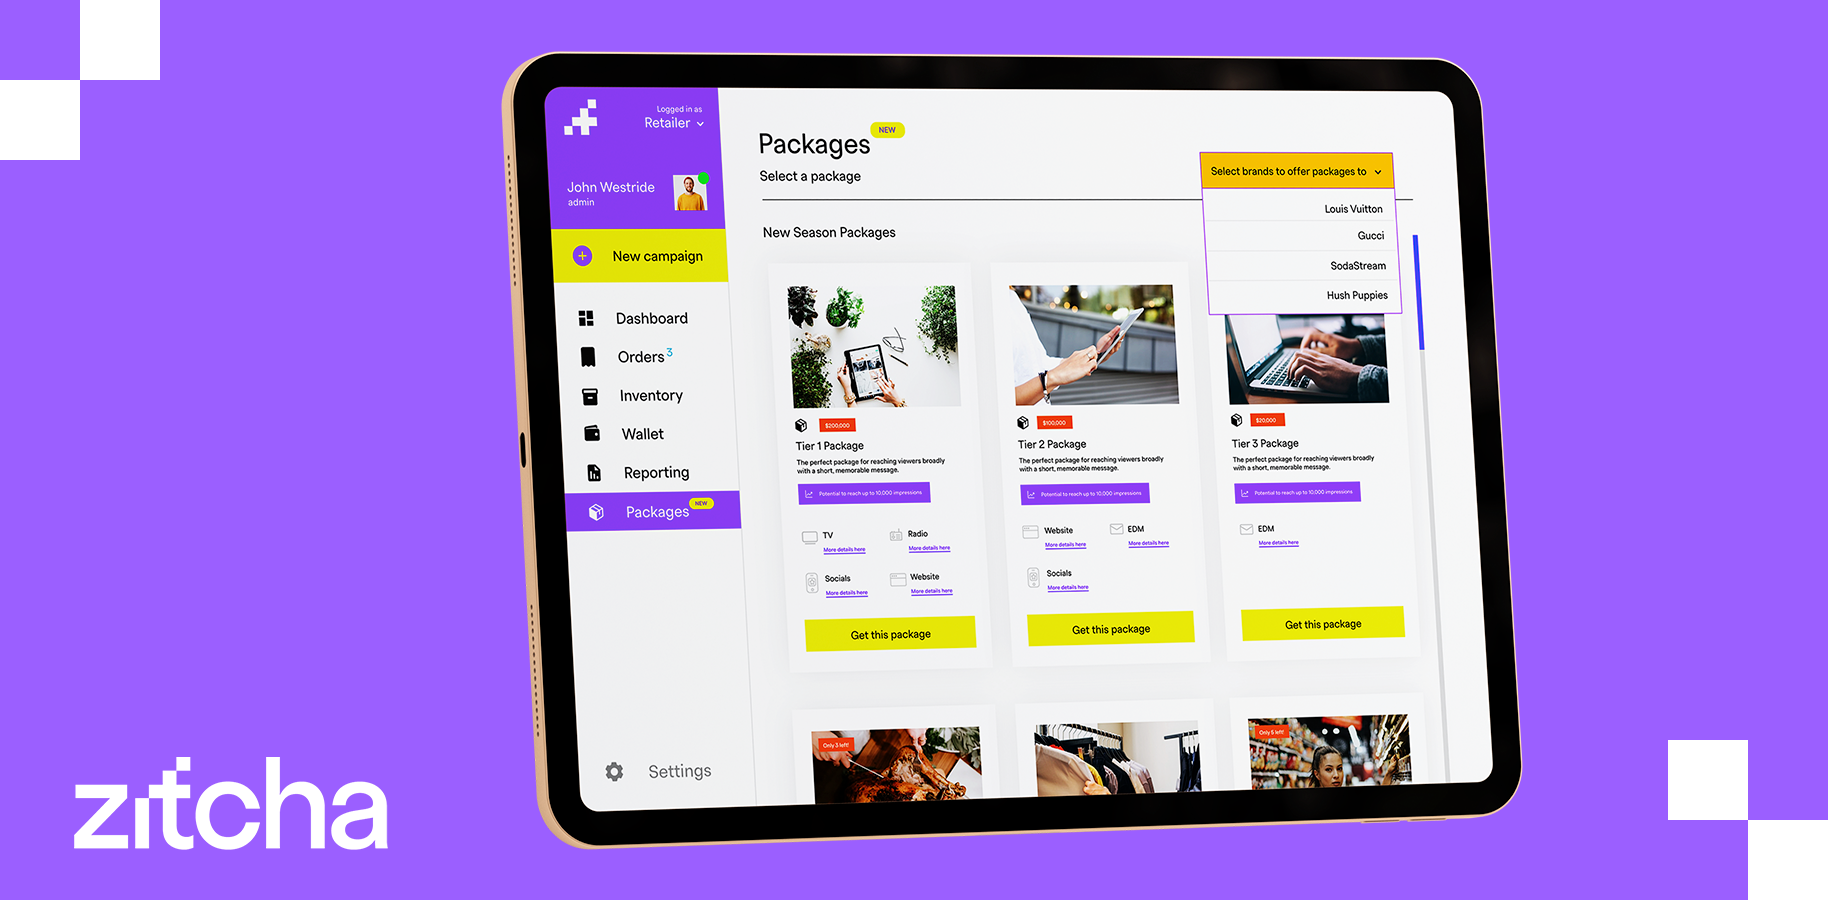 Zitcha Packages | Example image of the package types for Zitcha the best Retail Media Platform